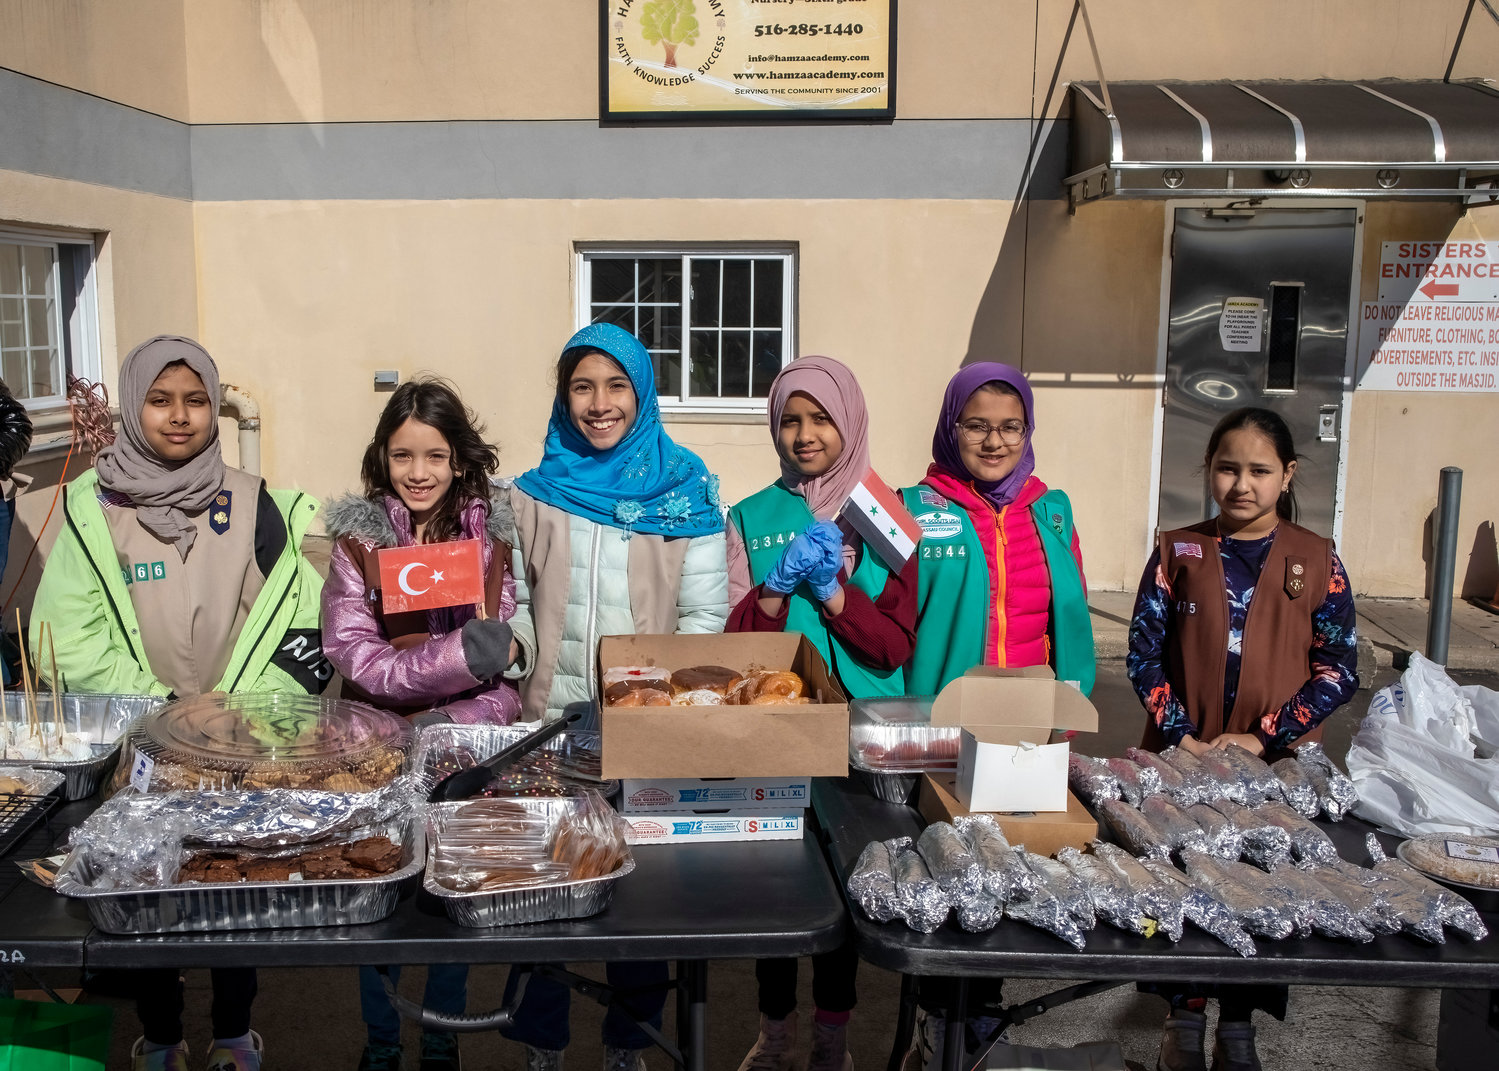 Valley Stream Girl Scout Troops launched a bake sale to raise money for the earthquake victims in Syria and Turkey. Girl Scouts Afifa Patel, left, Zehra Beskardes, Maryam Beskardes, Sakeena Vaseen, Aleena Rana, and Hiba Anwarulla man the tables.